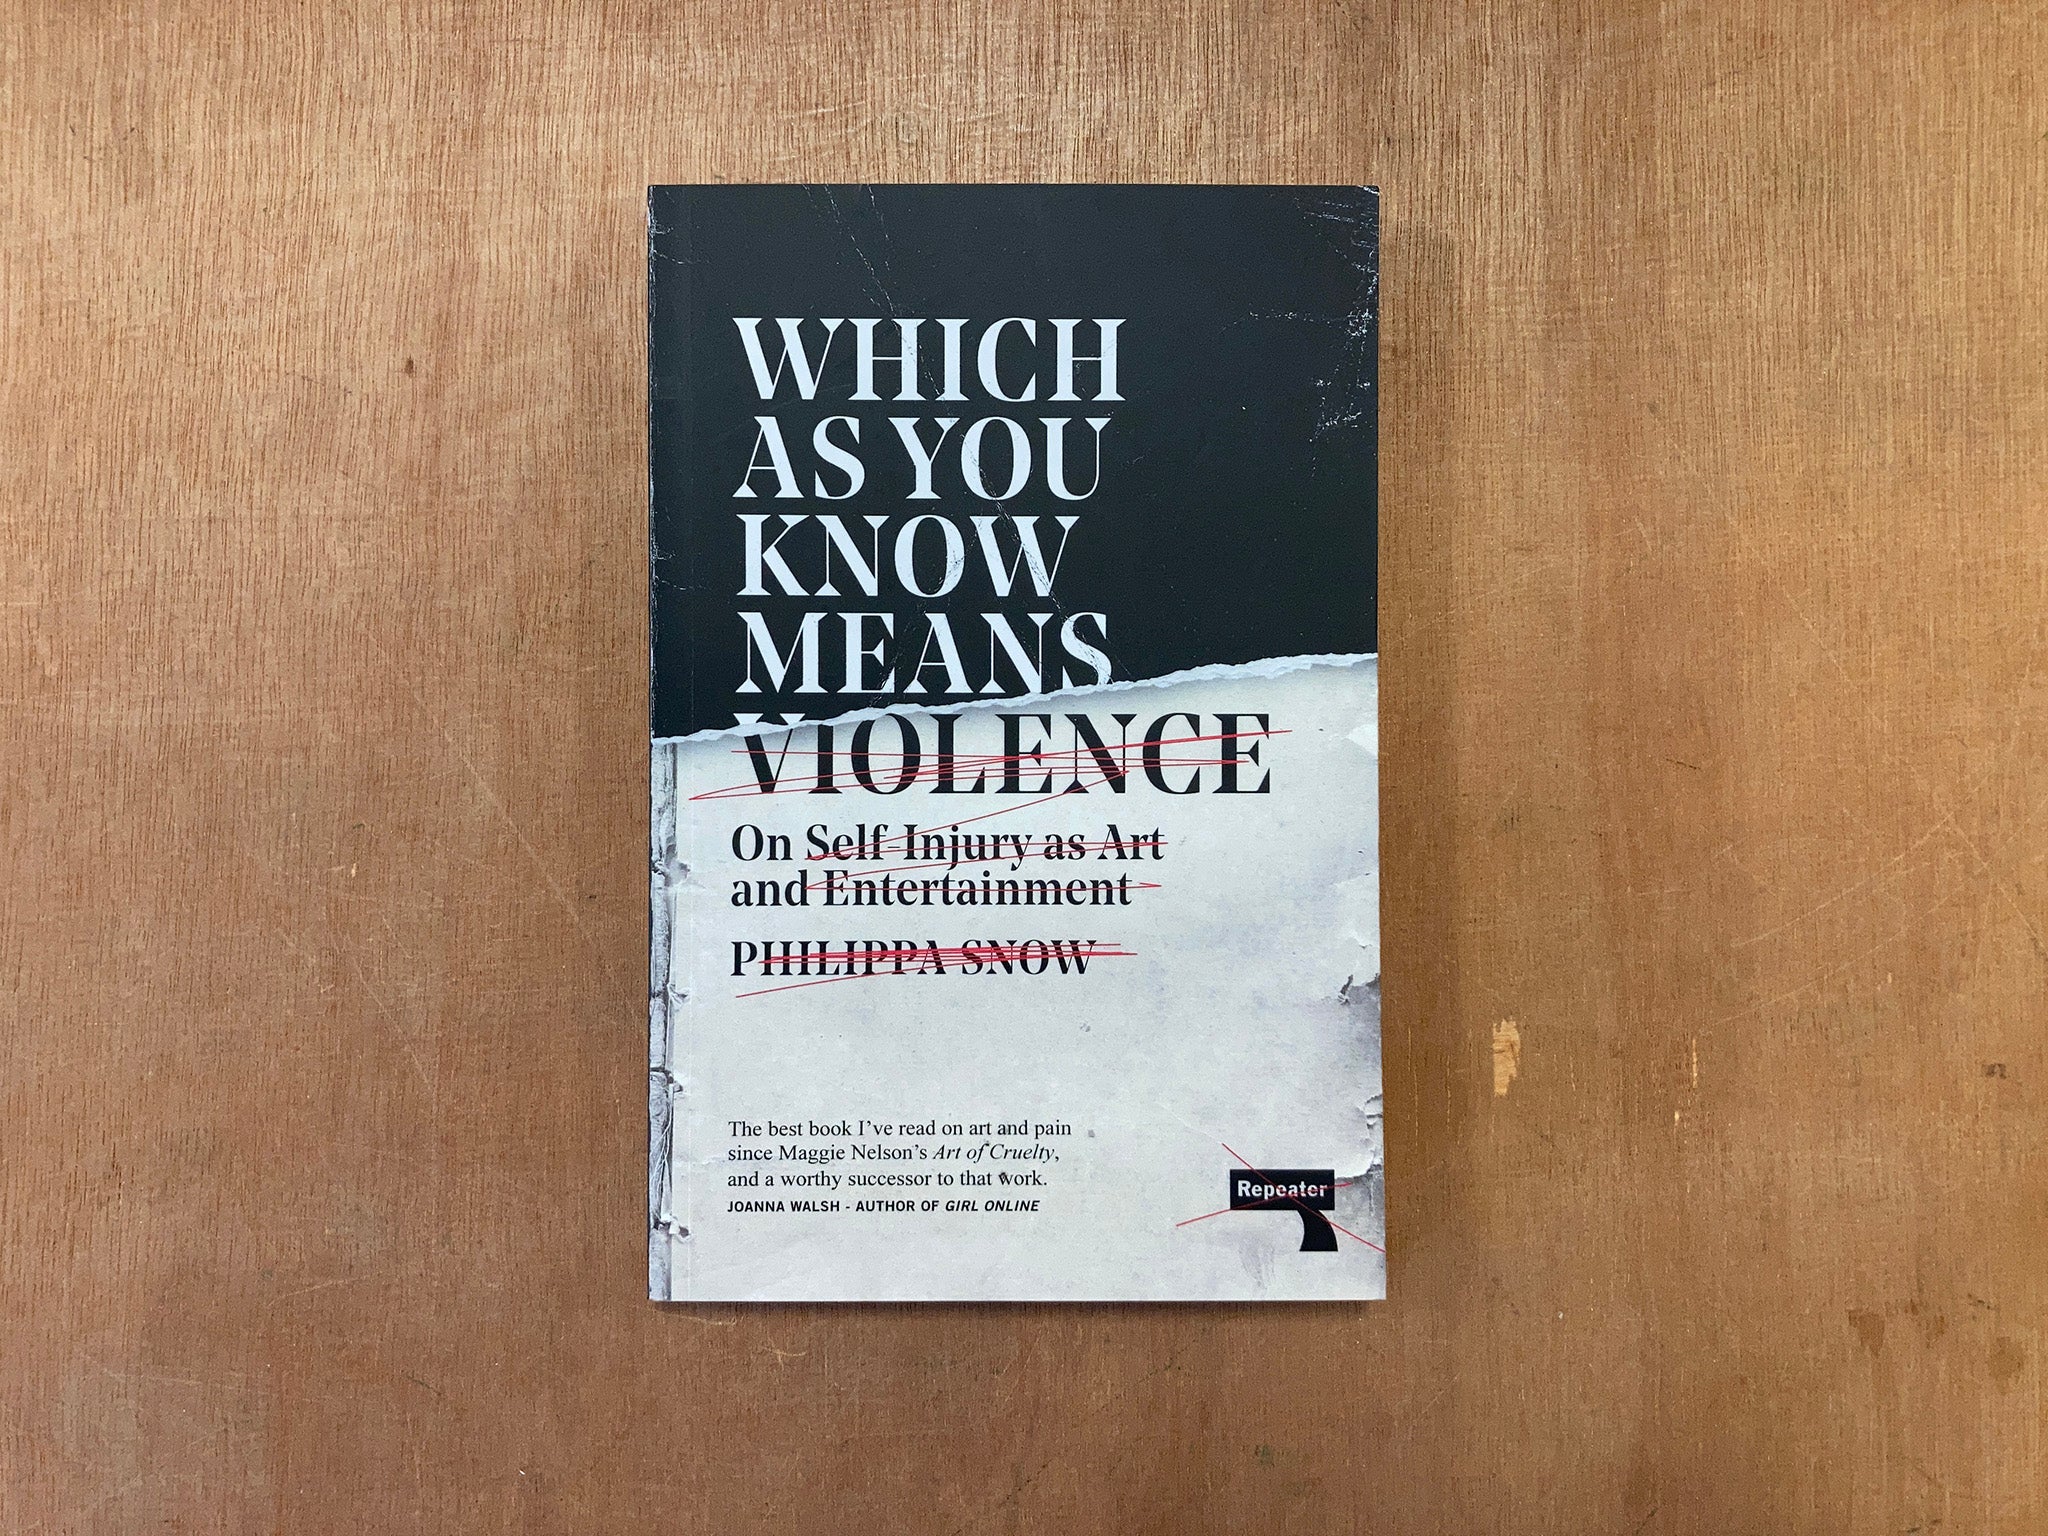 WHICH AS YOU KNOW MEANS VIOLENCE: ON SELF-INJURY AS ART AND ENTERTAINMENT by Philippa Snow